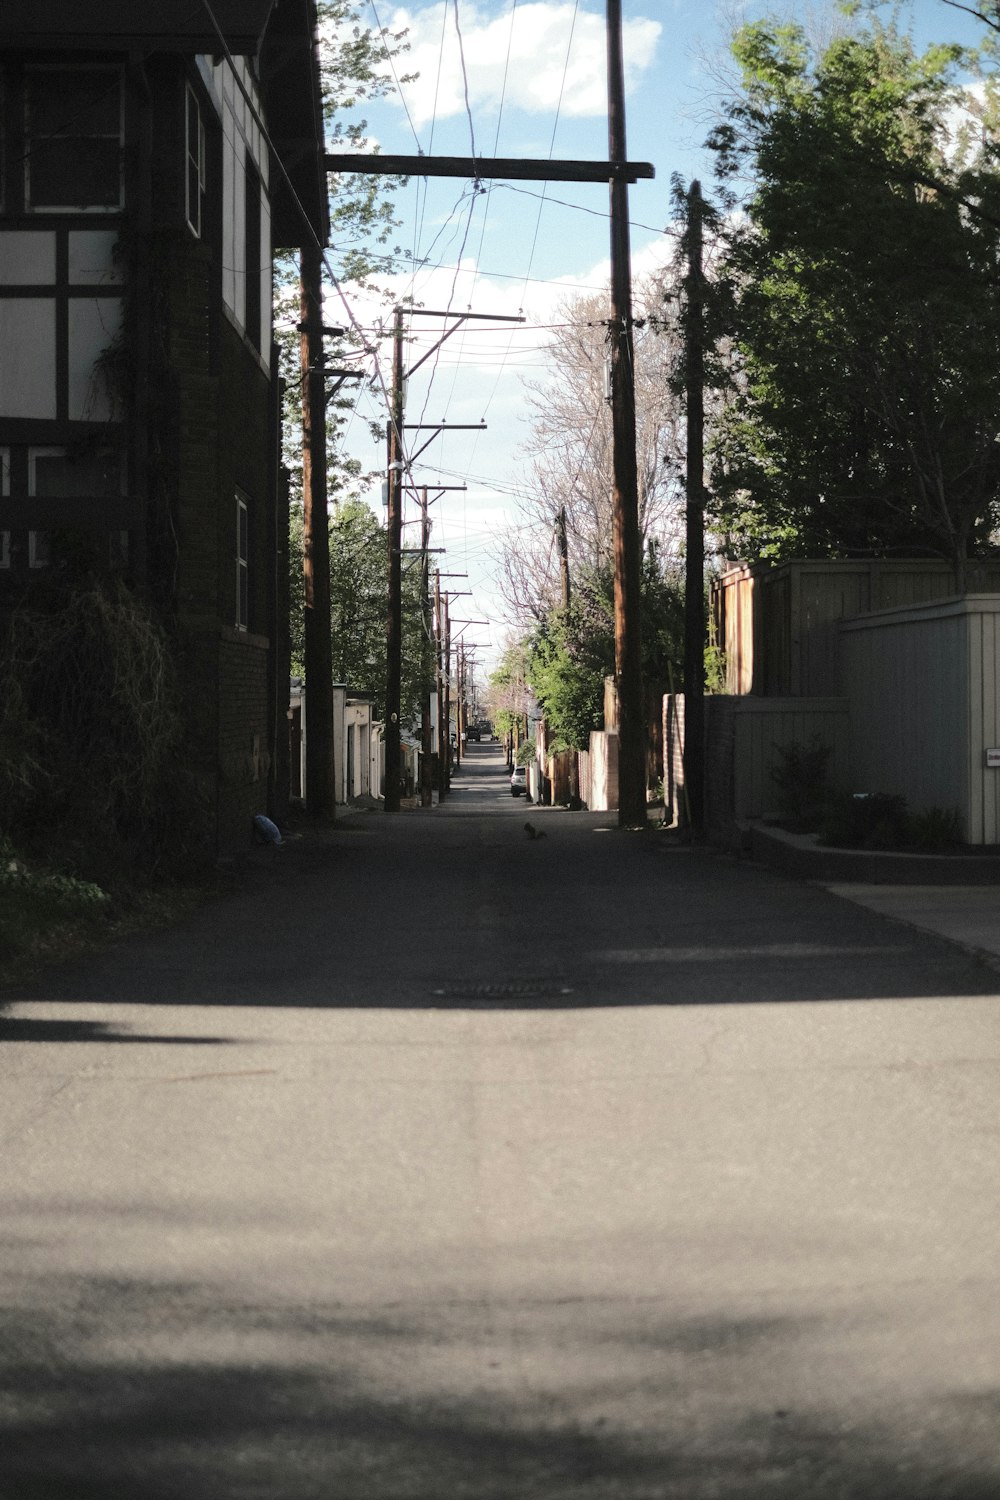 a street with trees and buildings